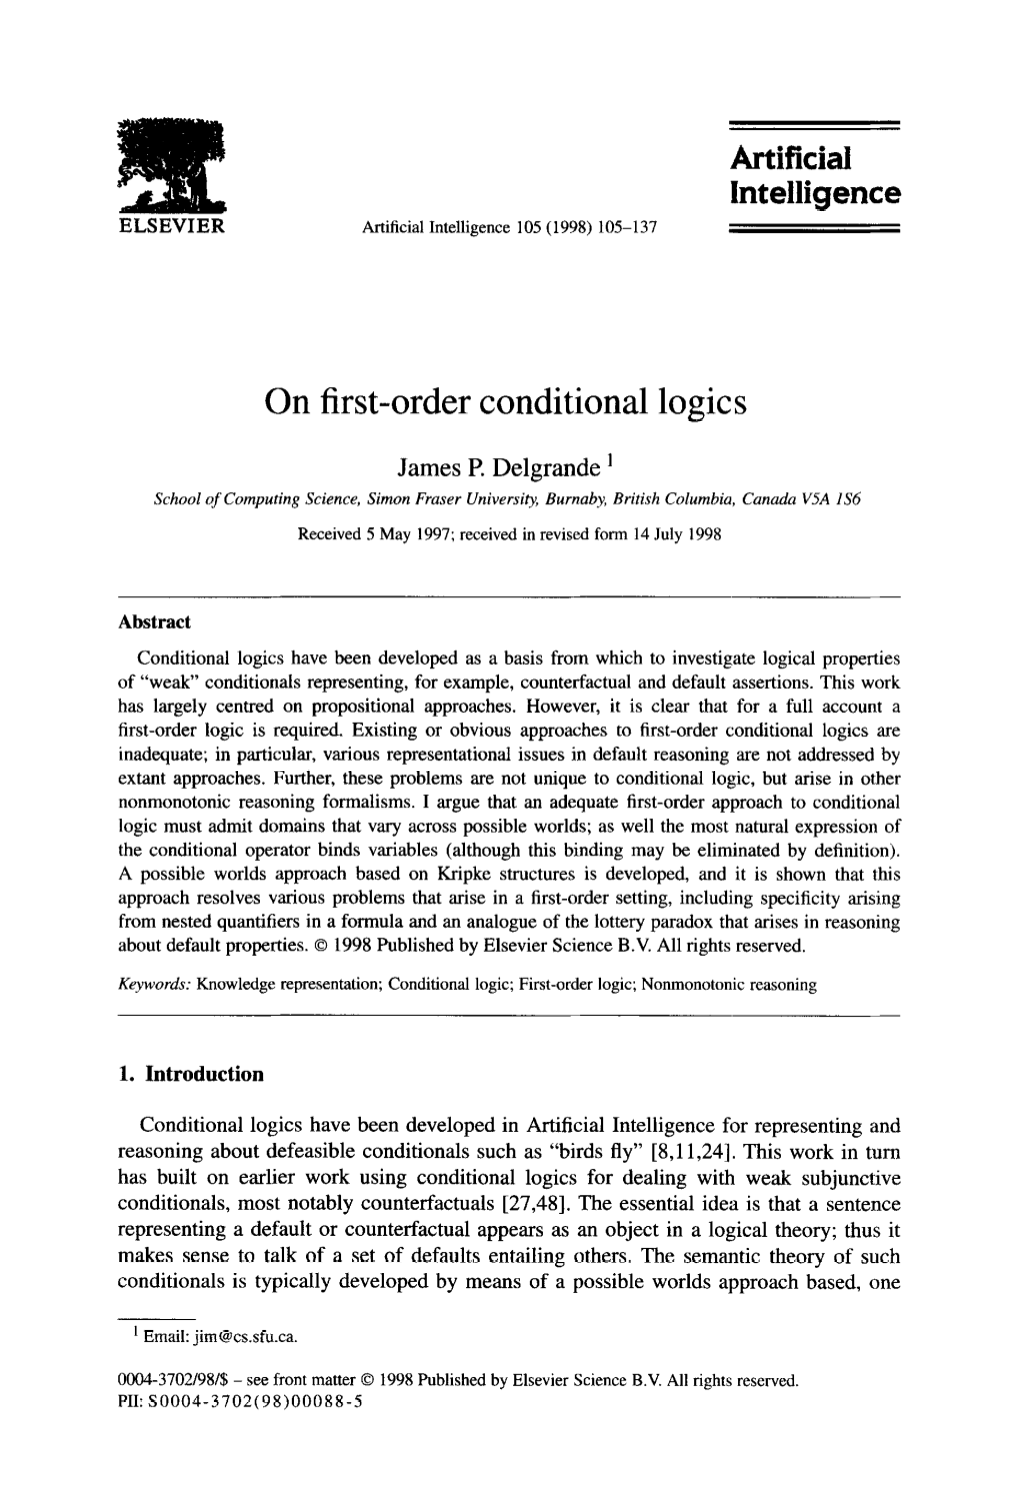 On First-Order Conditional Logics